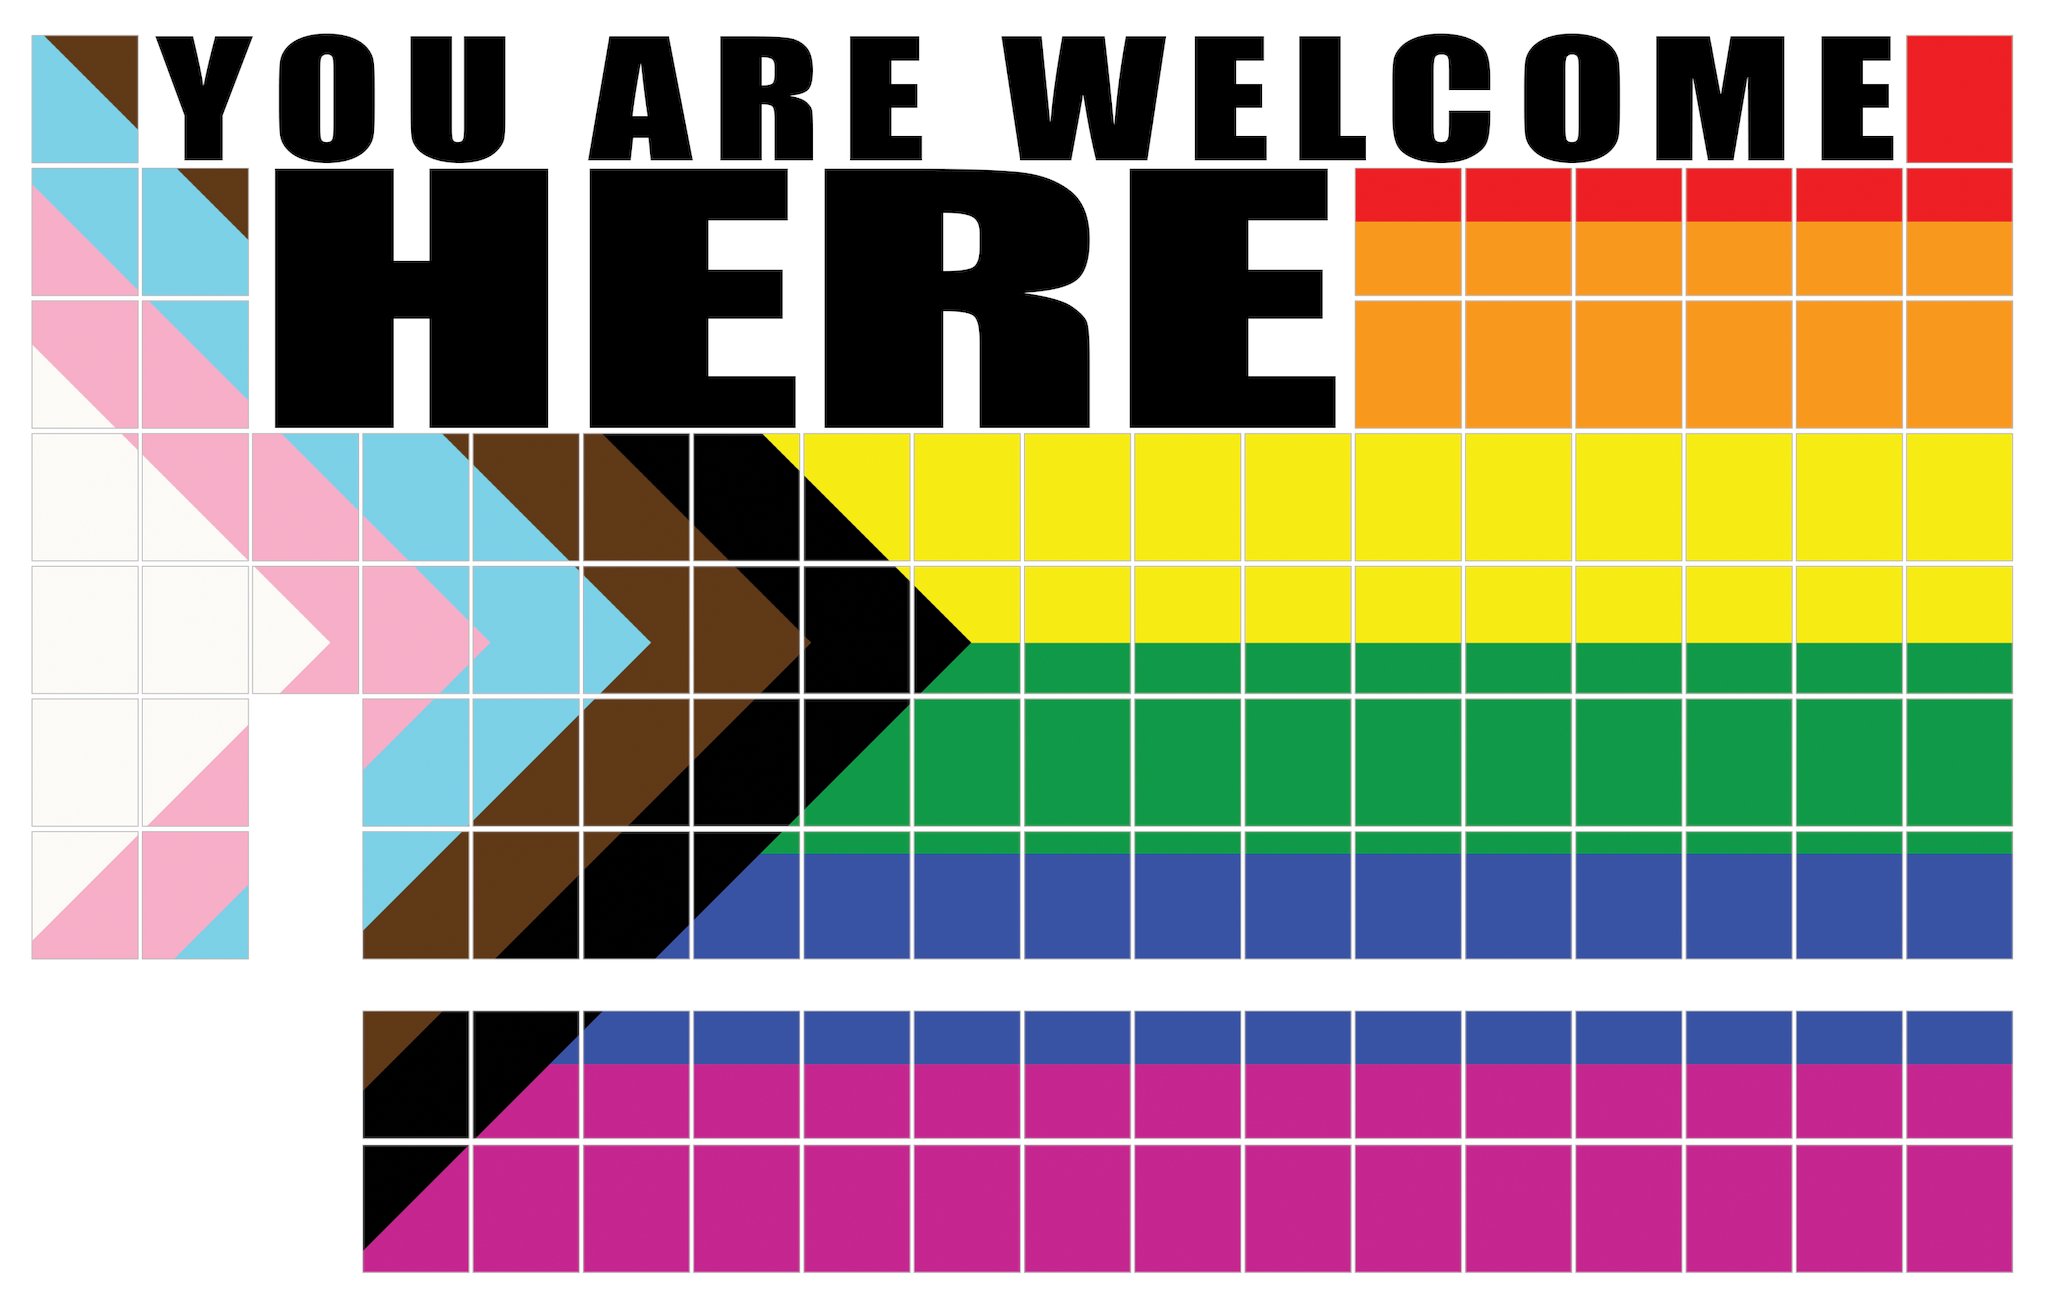 Periodic table with rainbow, trans (white, pink, blue), and black and brown colours, with the title: "You are welcome here"